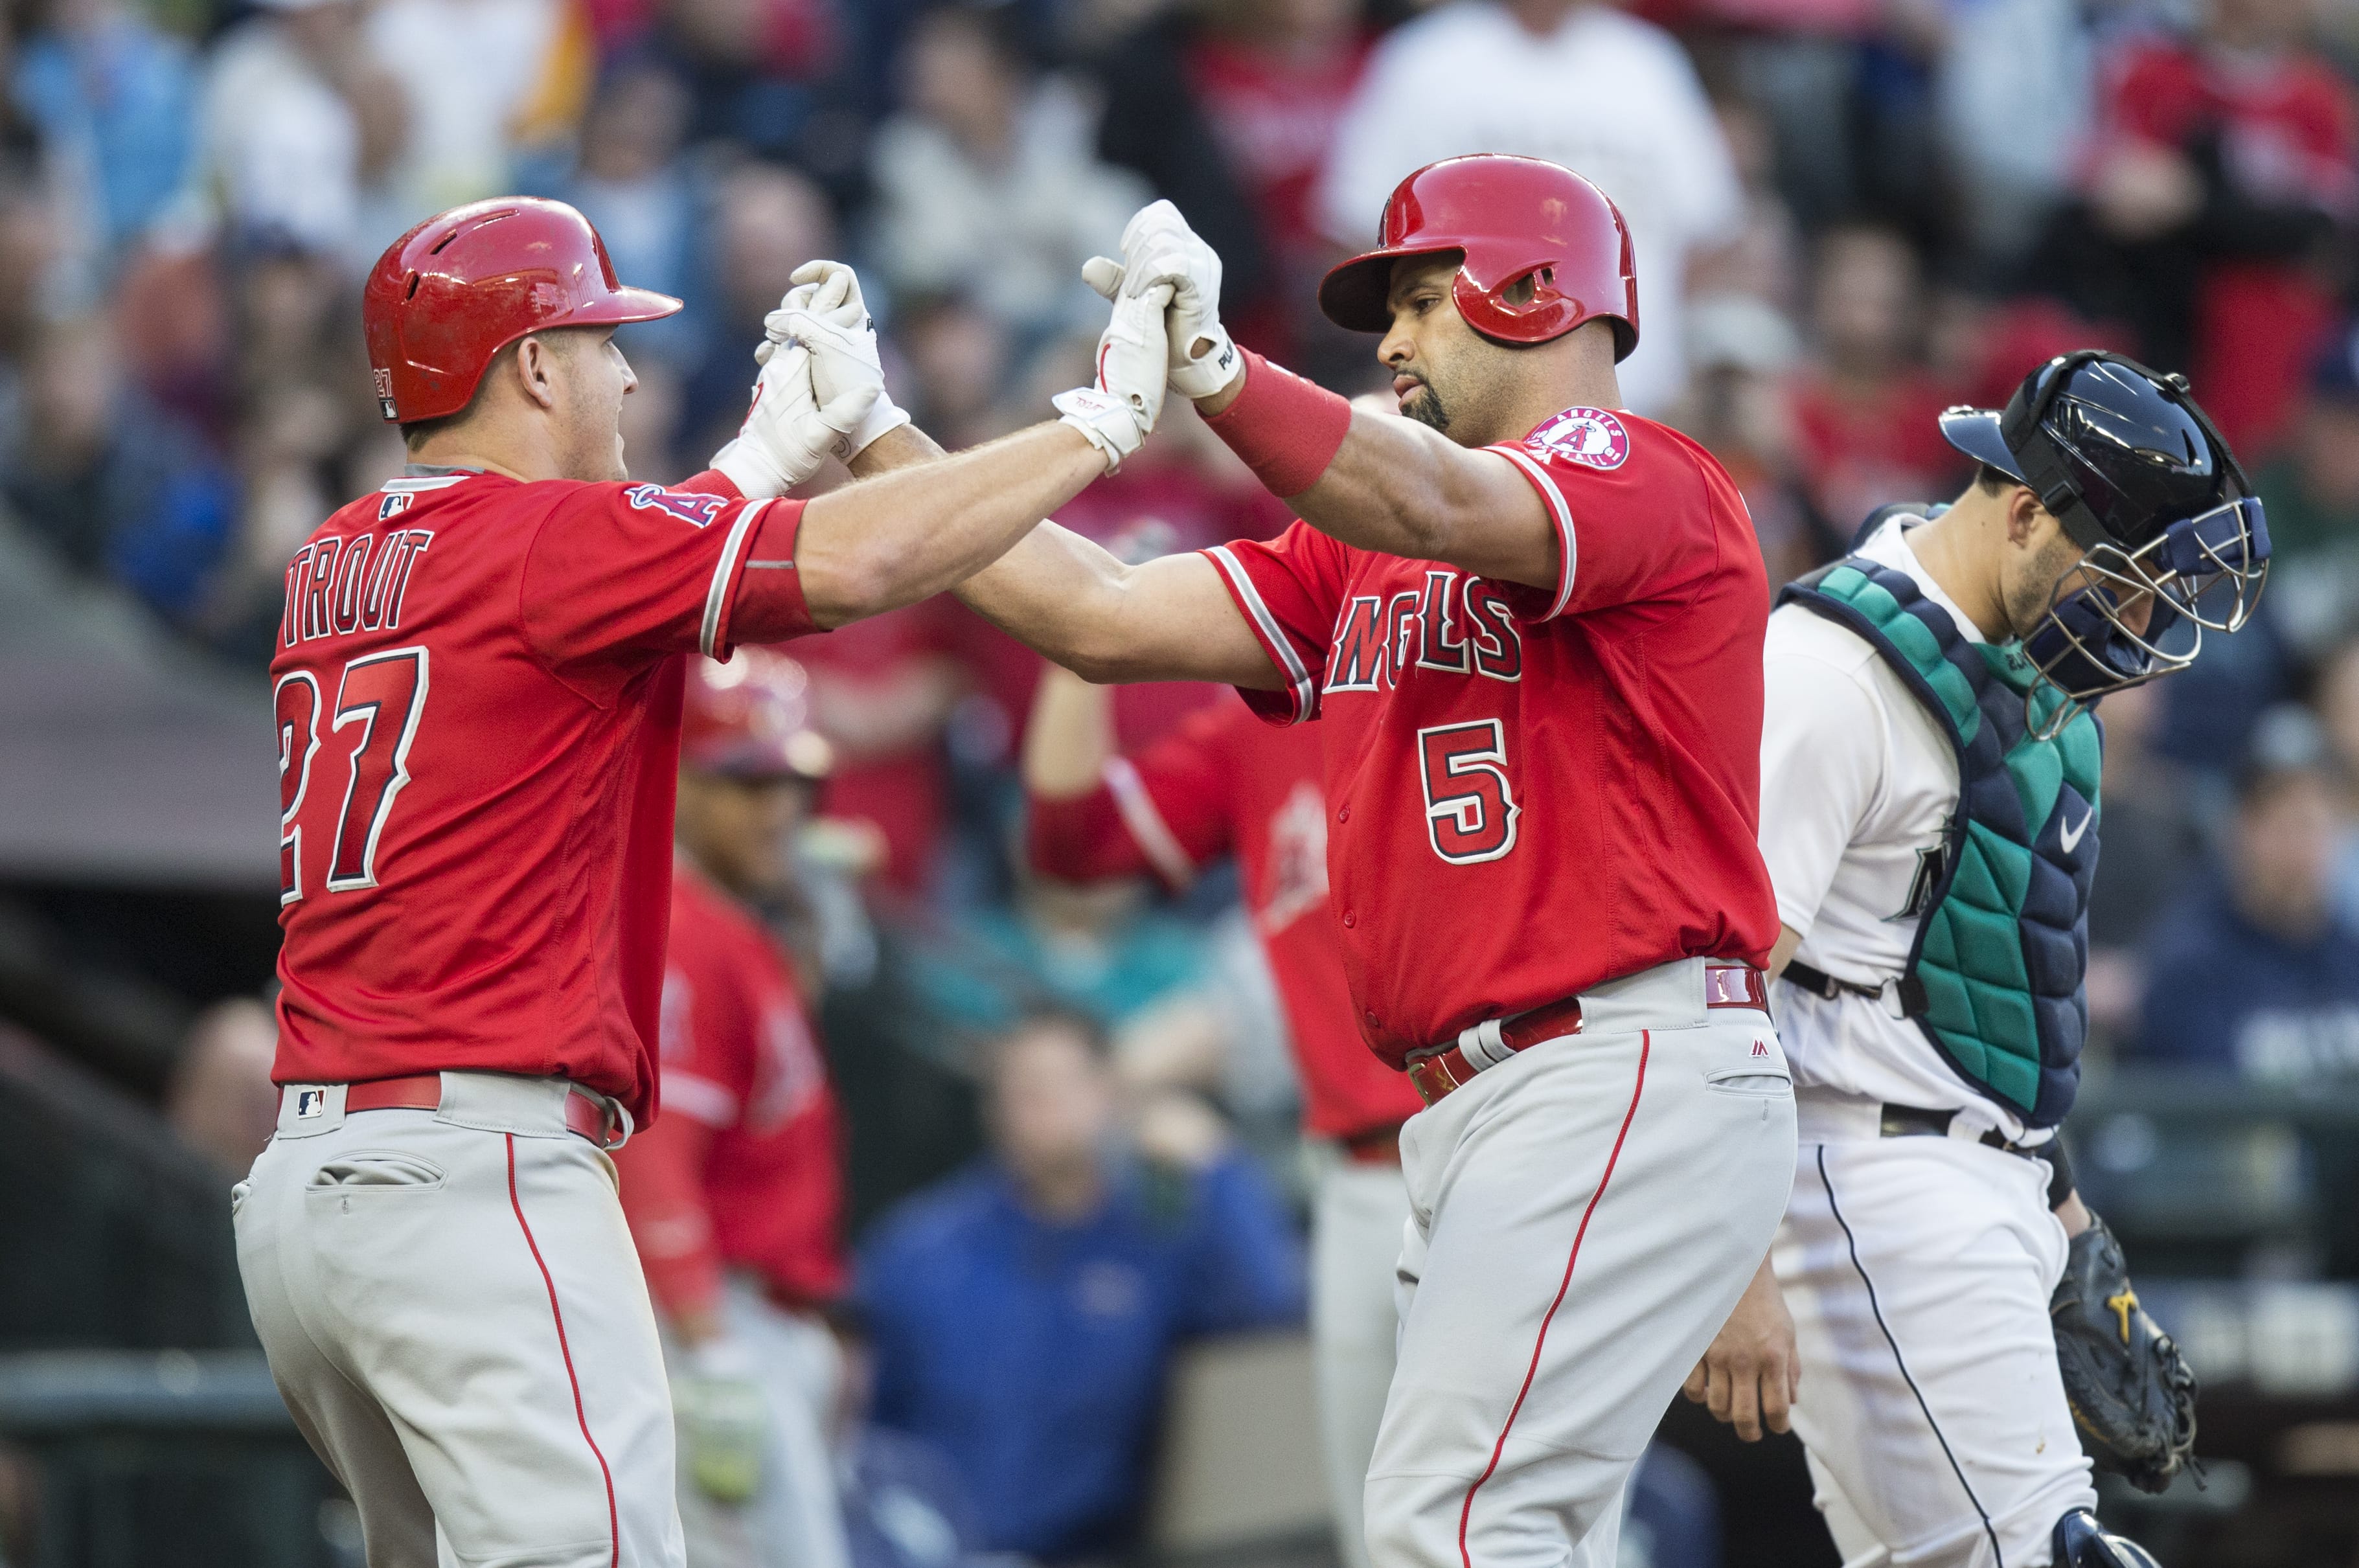 Los Angeles Angels' Albert Pujols, right, is congratulated by teammate Mike Trout after hitting a two-run home run off of Seattle Mariners relief pitcher Pat Venditte that scored Trout during the second inning of a baseball game, Saturday, Sept. 3, 2016, in Seattle. The home run was the second by Pujols in as many innings.